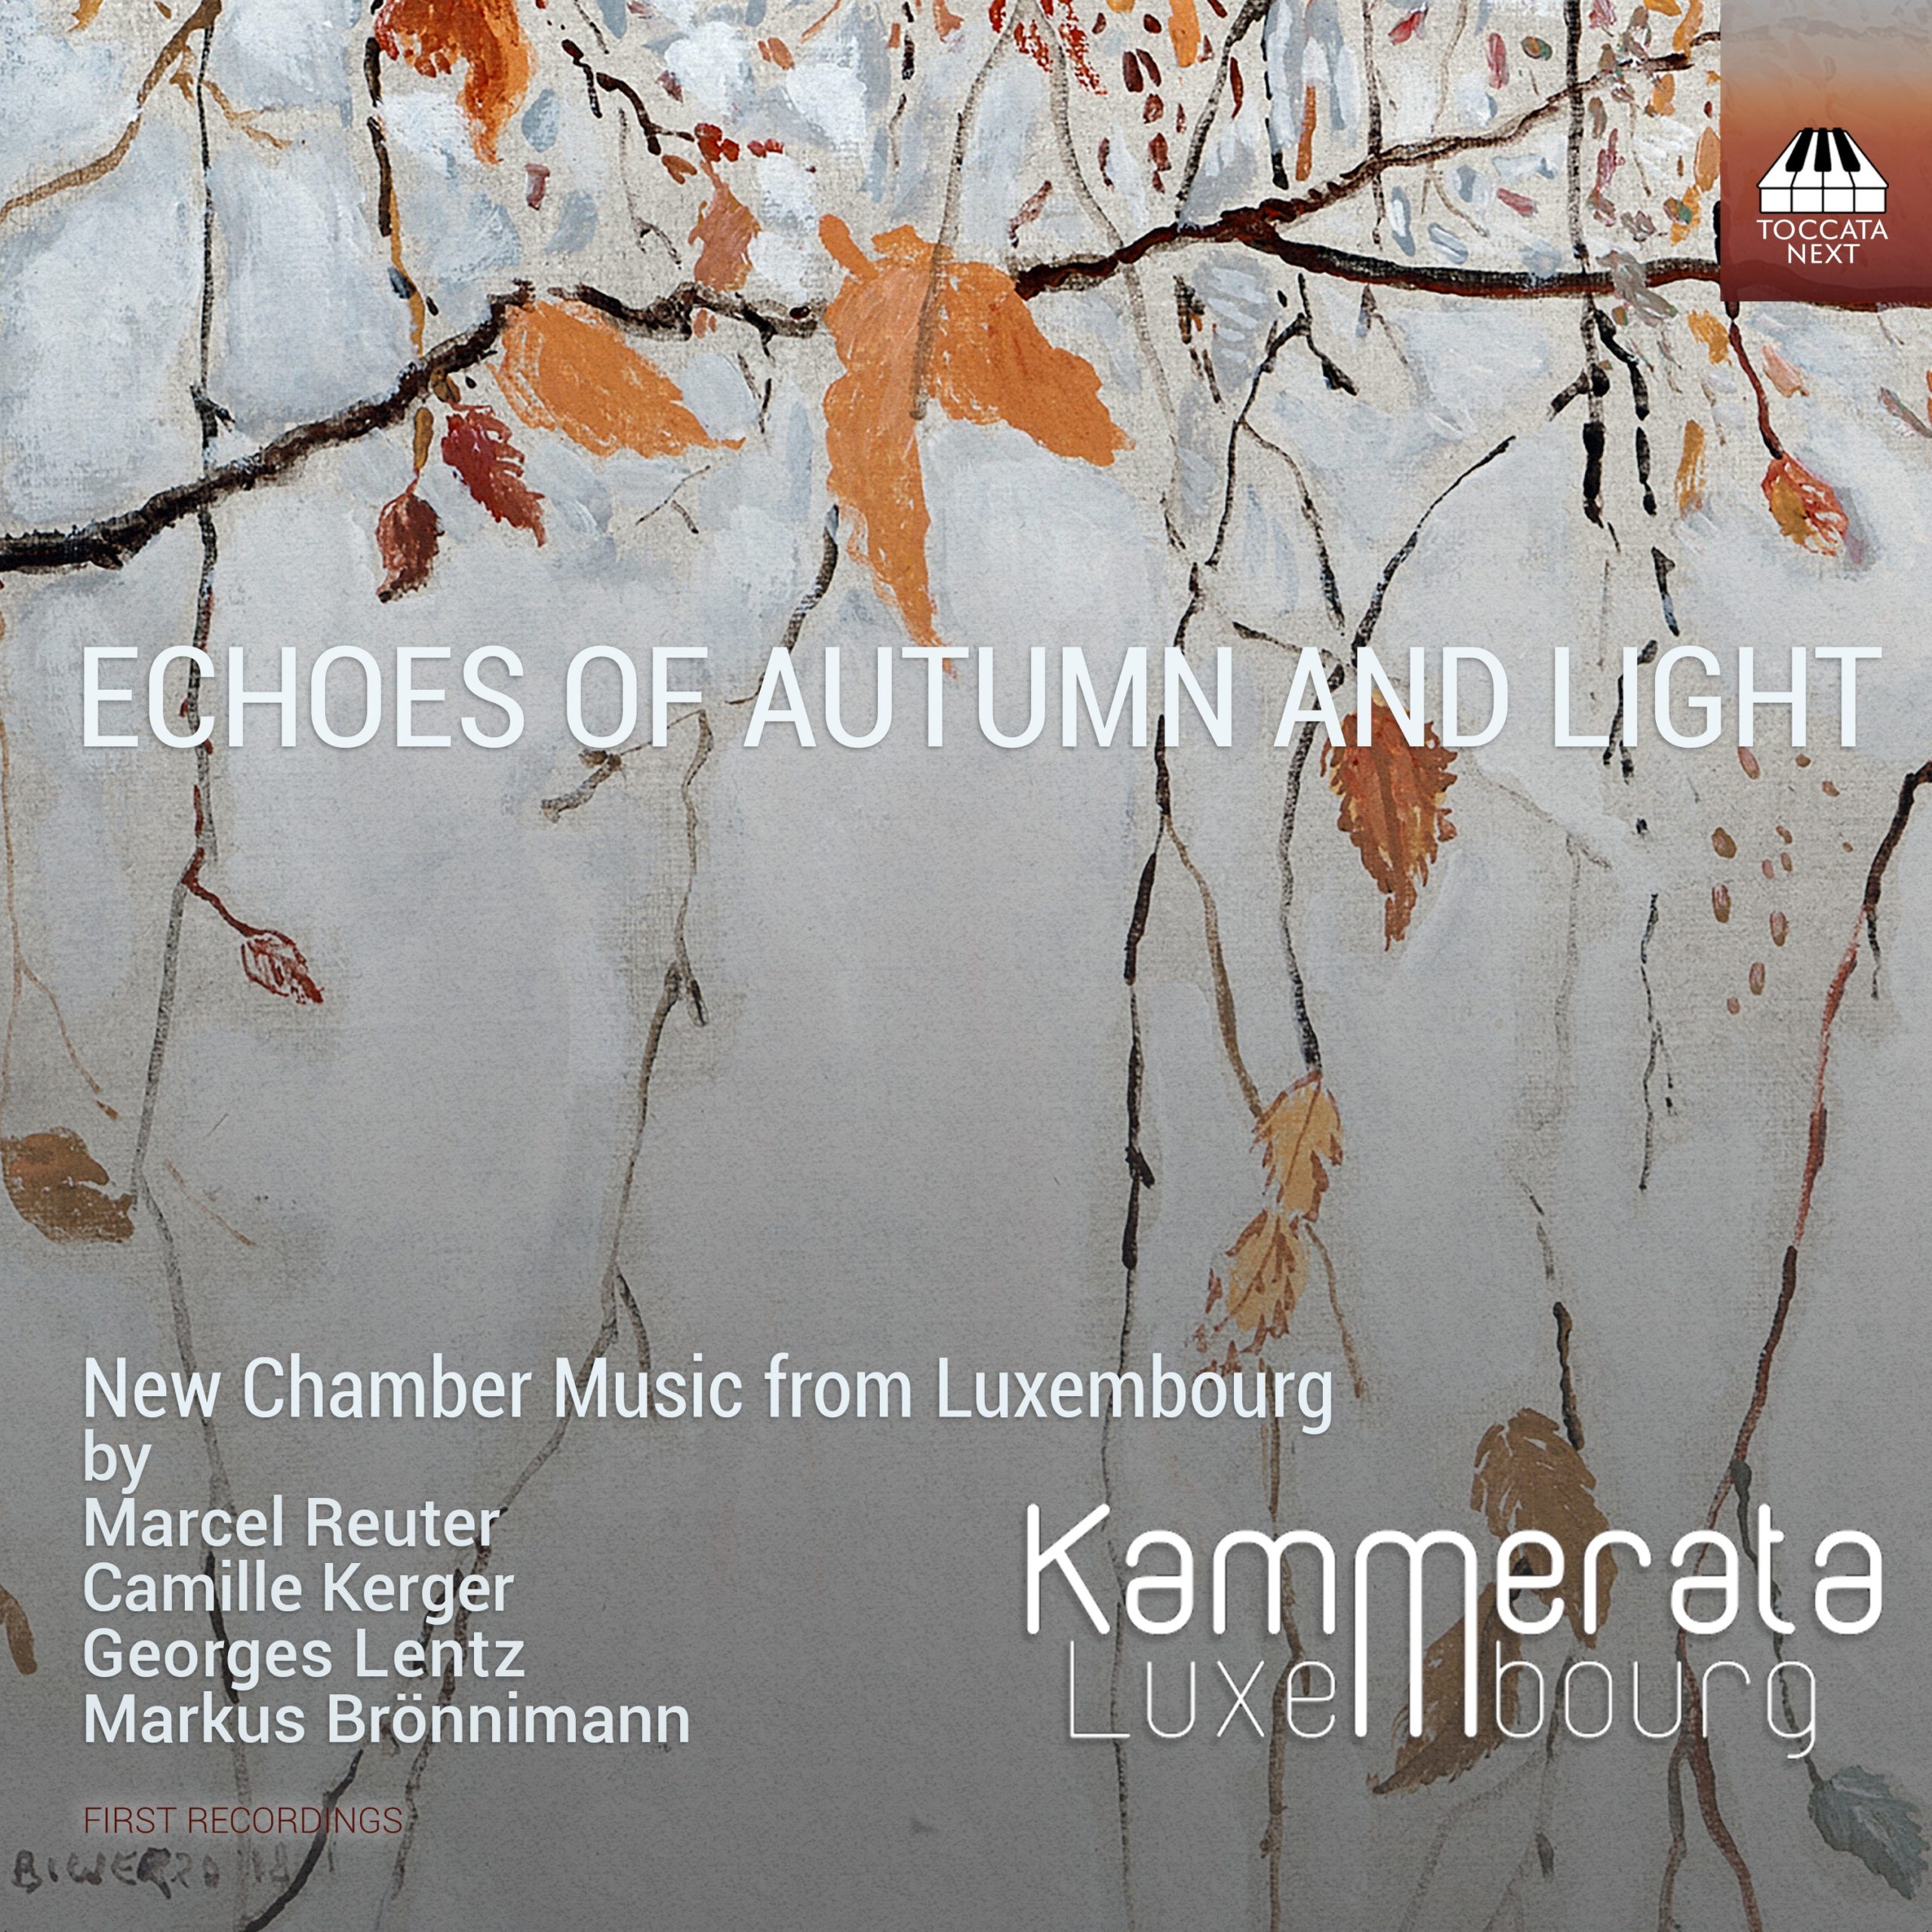 Kammerata Luxembourg – Echoes of Autumn and Light: New Chamber Music from Luxembourg (2021) [FLAC 24bit/96kHz]